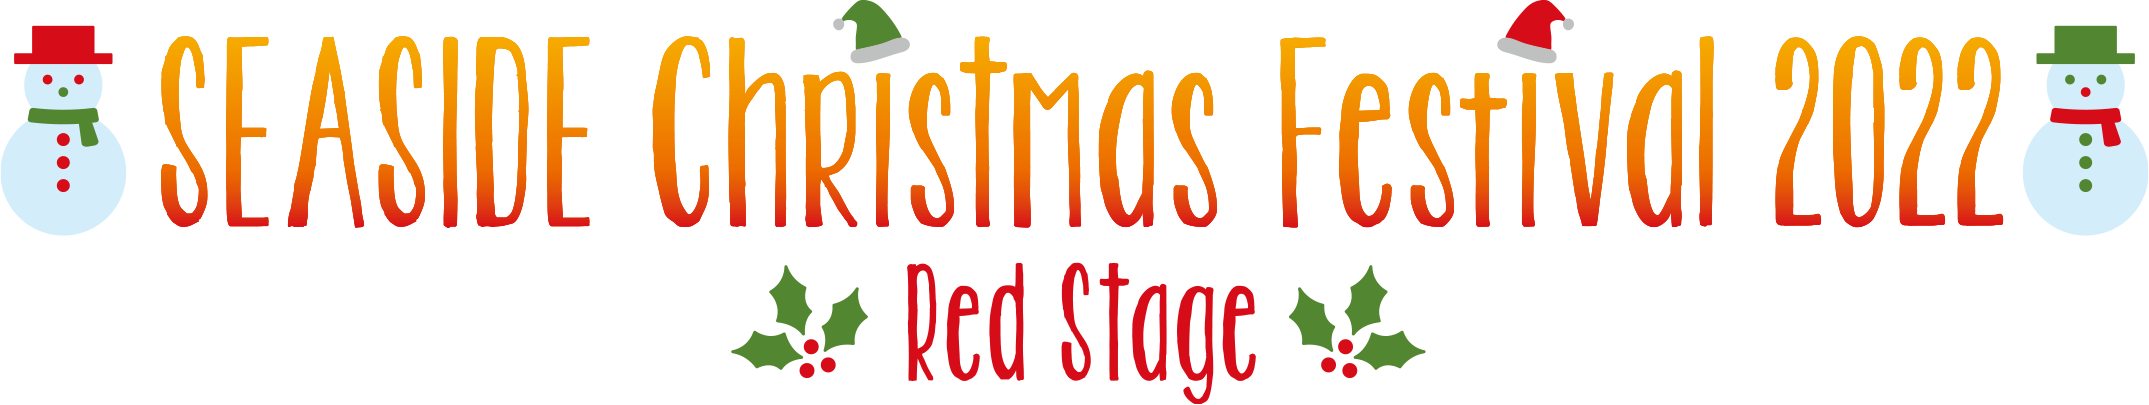 SEASIDE Christmas Festival 2022 〜Red Stage〜